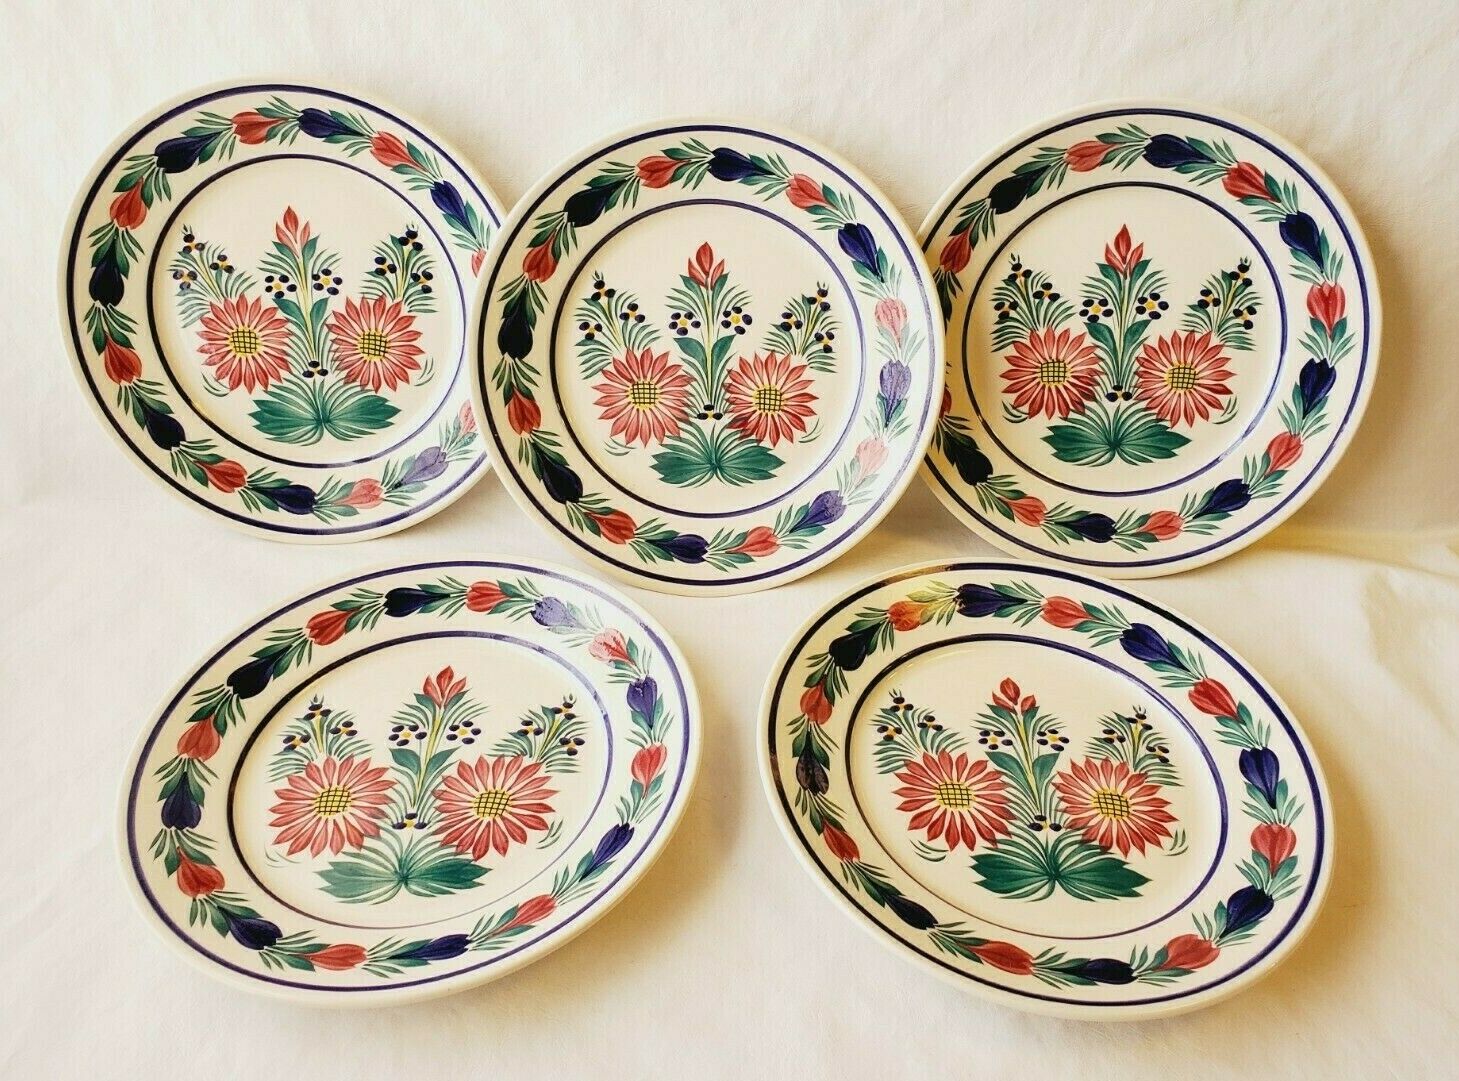 Lot Of 5 Quimper Fleuri 9" Luncheon Plates 9.25" France Red Blue Flowers Signed